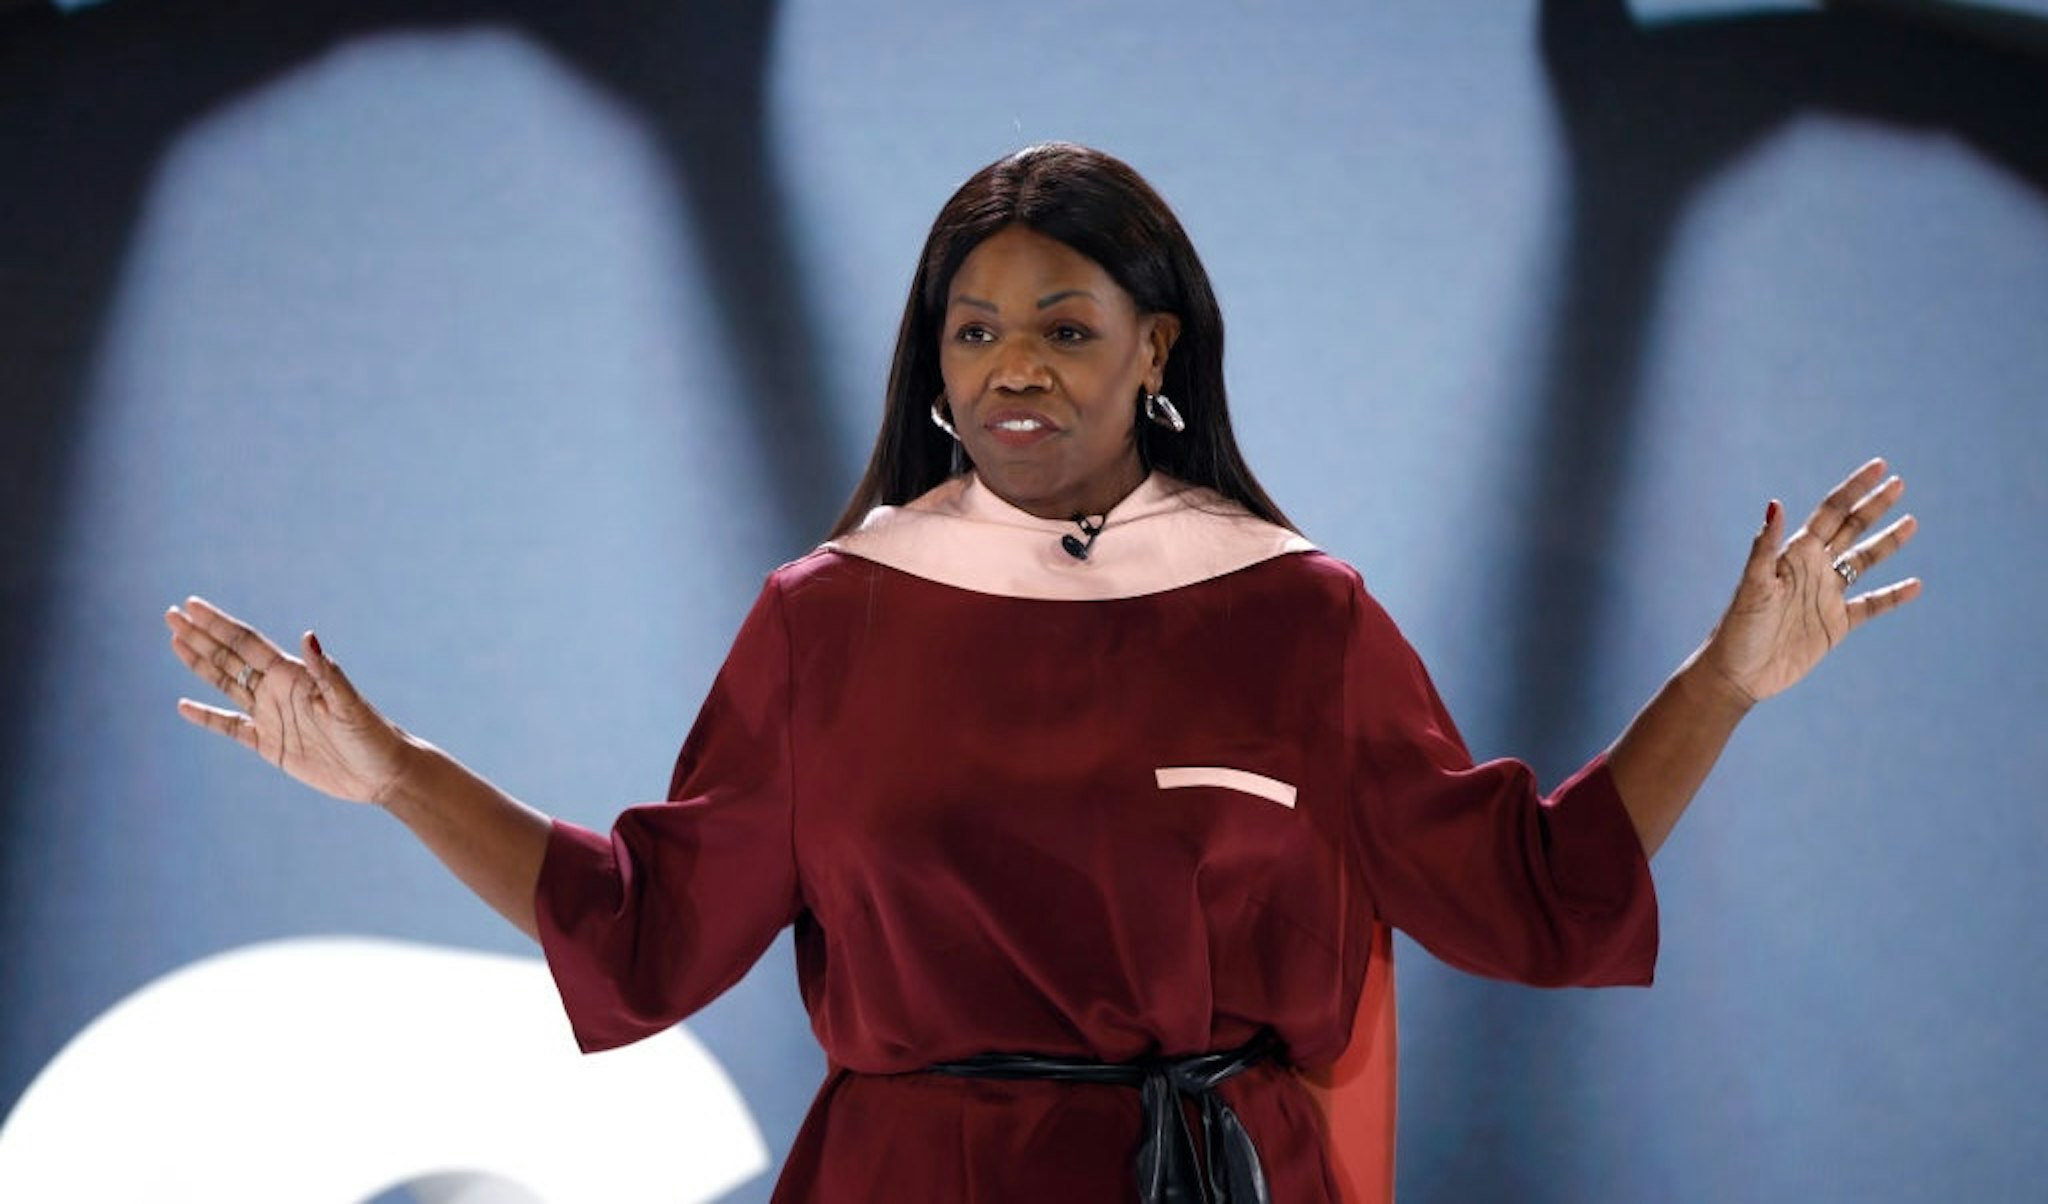 In this image released on December 2nd, Dame Vivian Hunt speaks on stage during BoF VOICES 2021 at Soho Farmhouse on December 01, 2021 in Oxfordshire, England. (Photo by John Phillips/Getty Images for BoF VOICES)